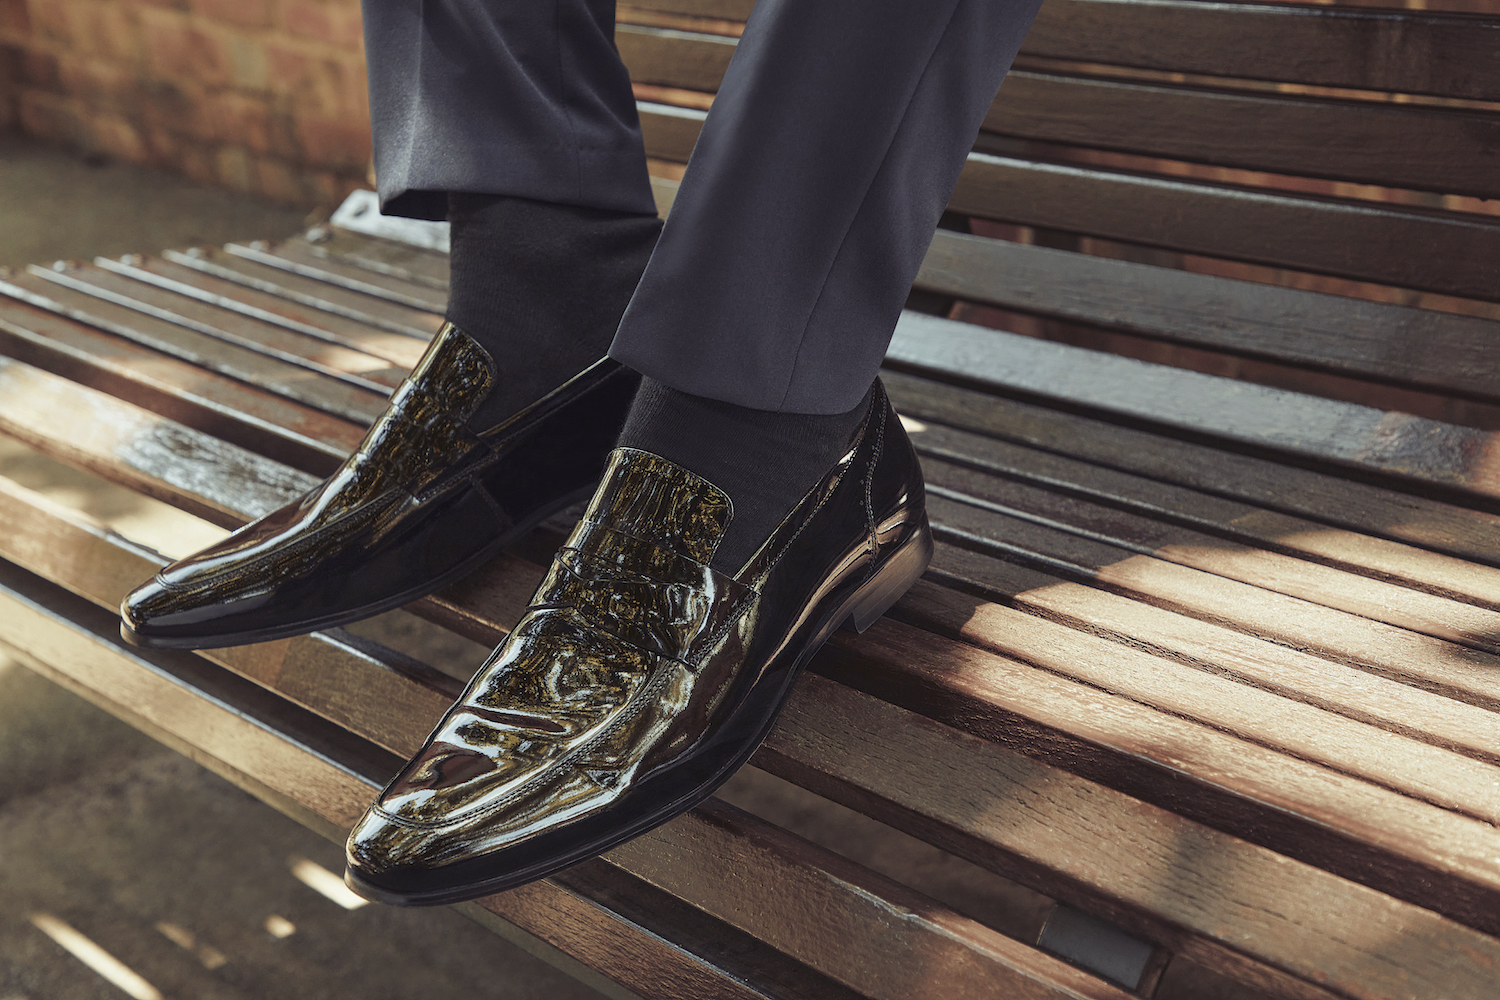 Get Event Ready With Julius Marlow’s Stylish & Effortless Men’s Shoes